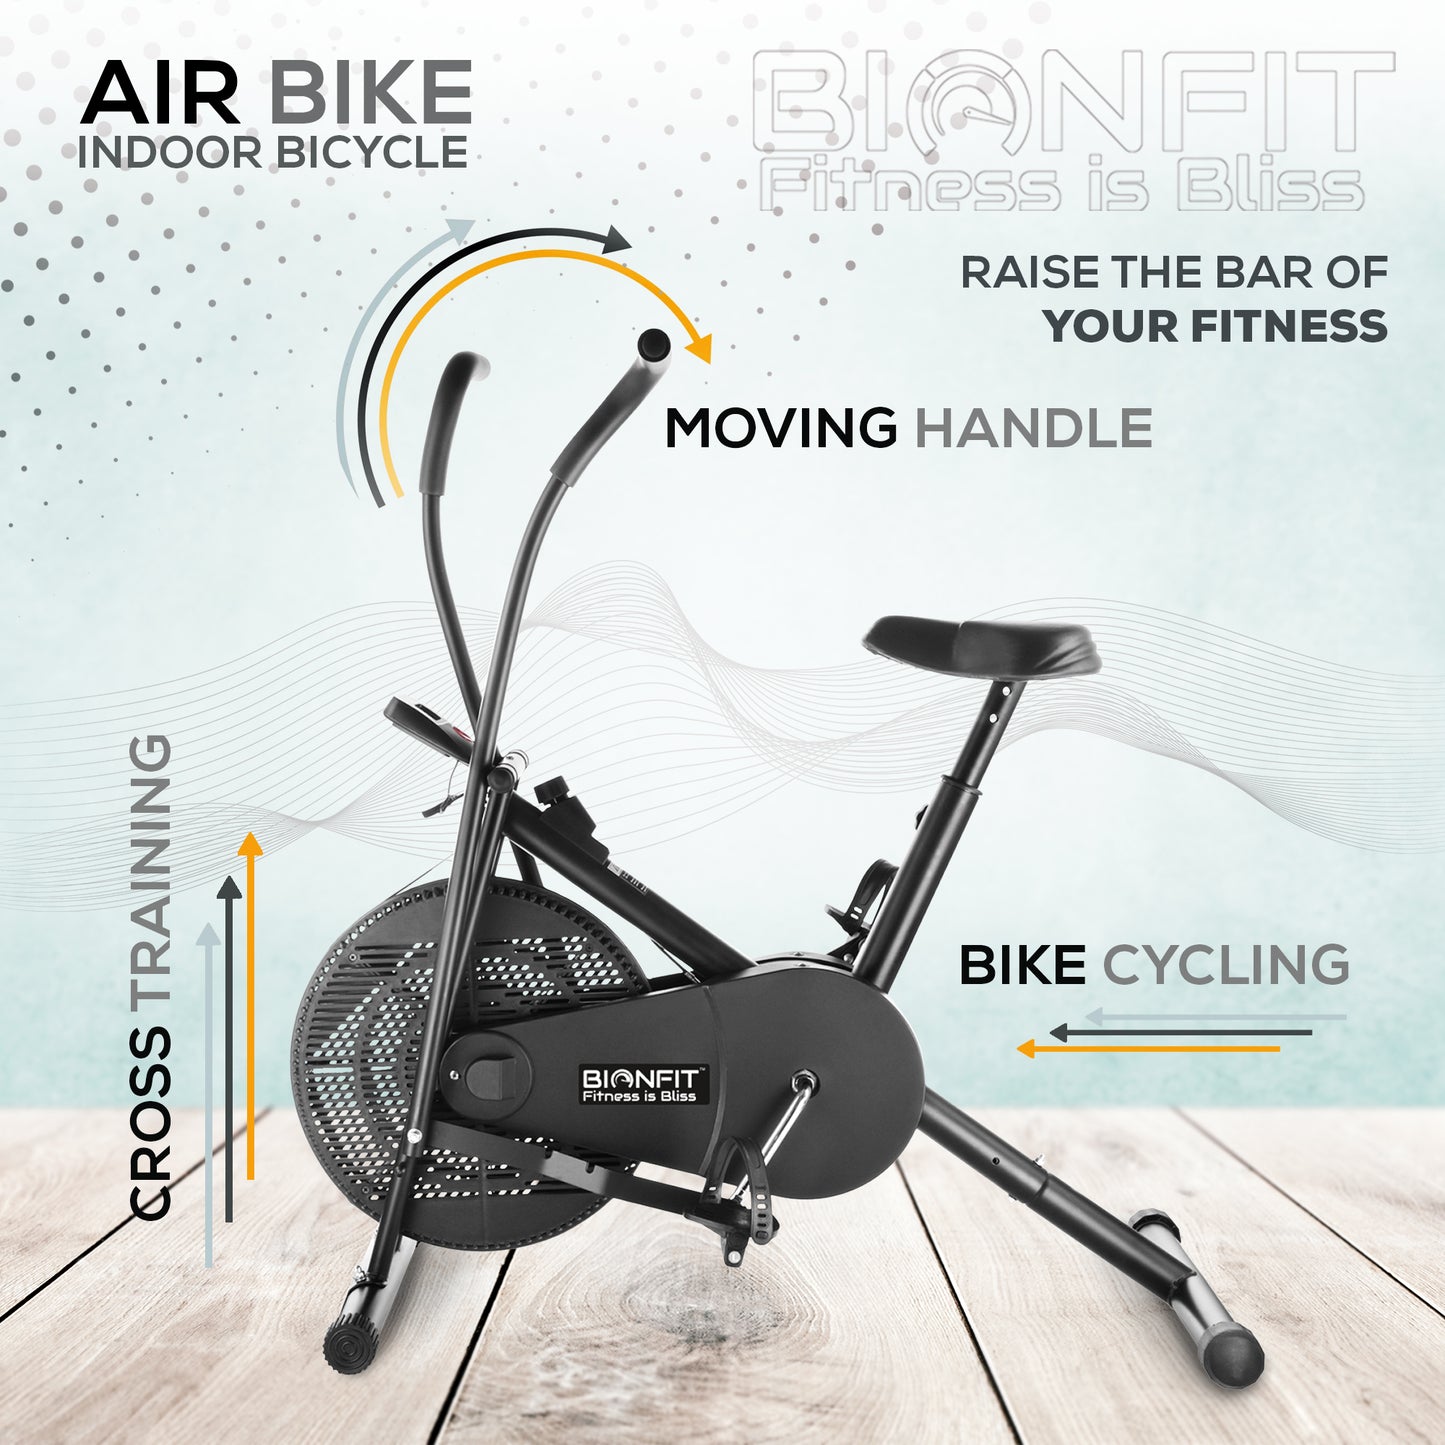 Bionfit ON01M 100kg Weight Capacity Moving Handle Air Bike - Low Impact, Full-Body Workout